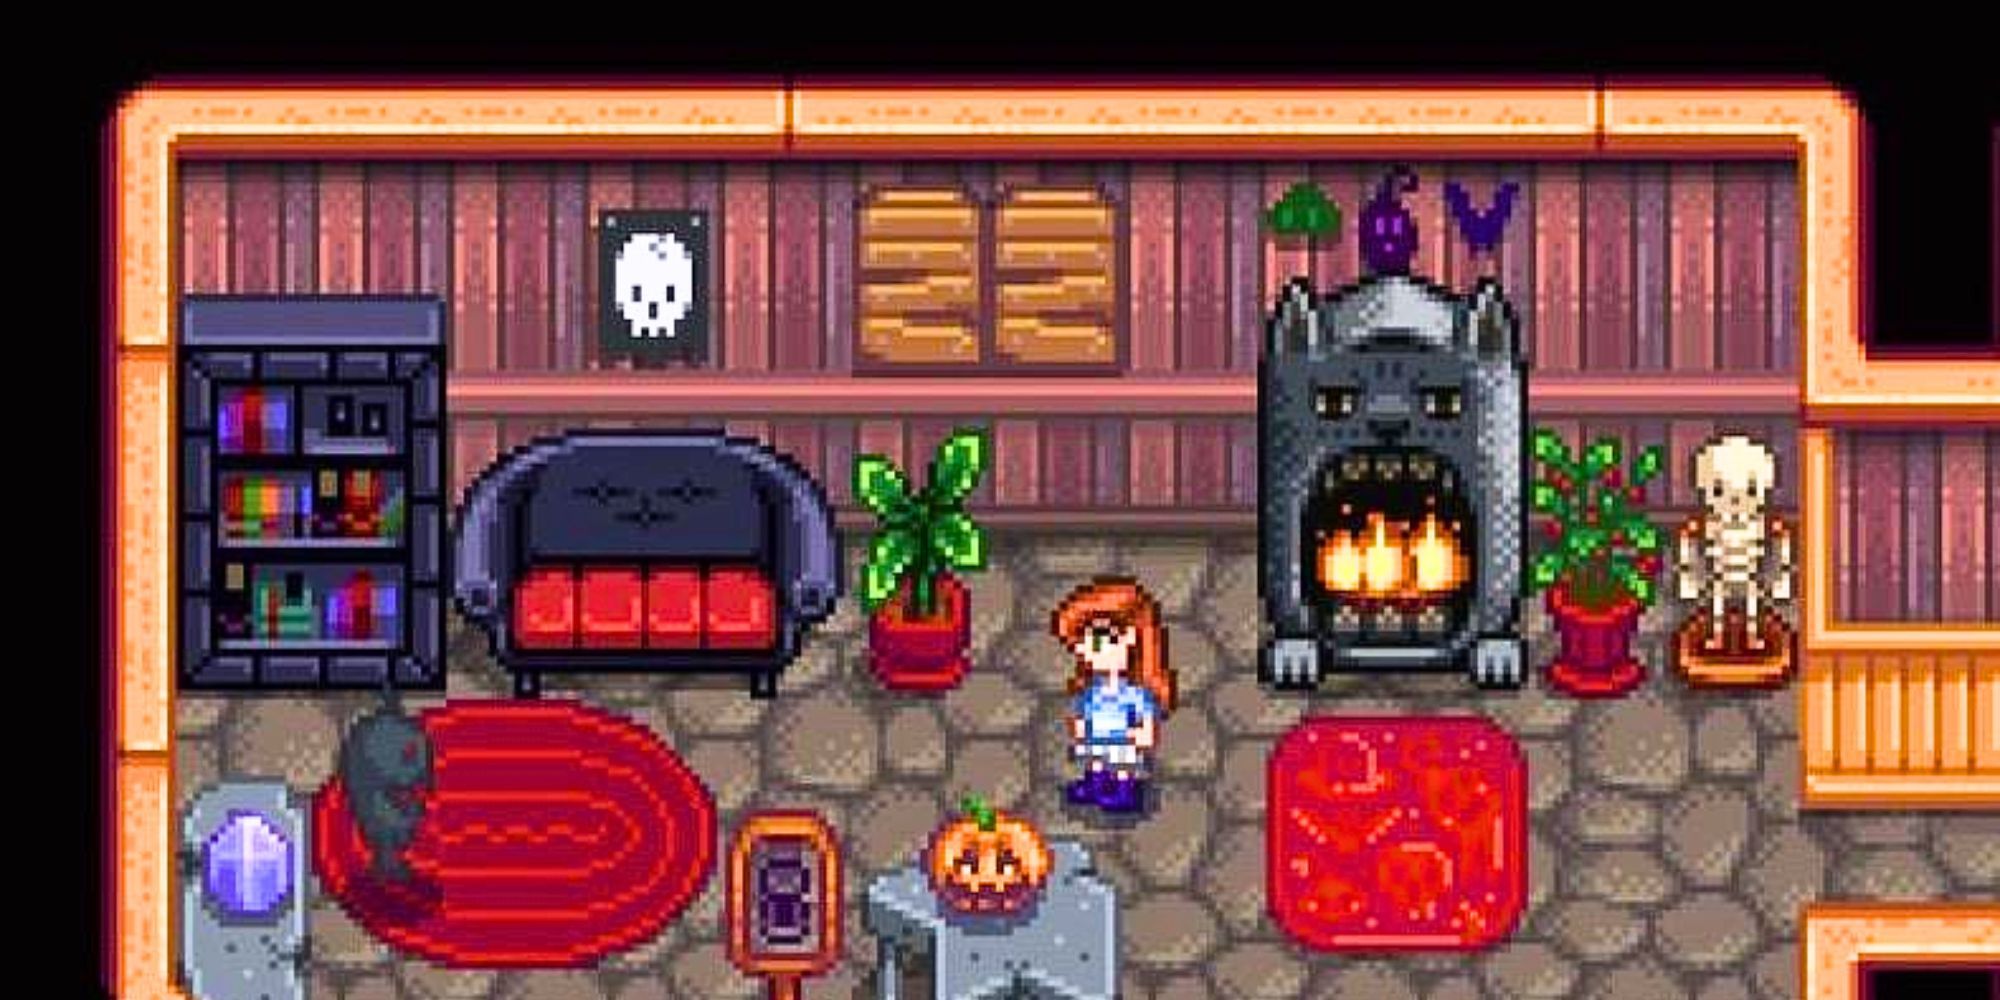 Stardew Valley's Monster Fireplace in the farmer's house